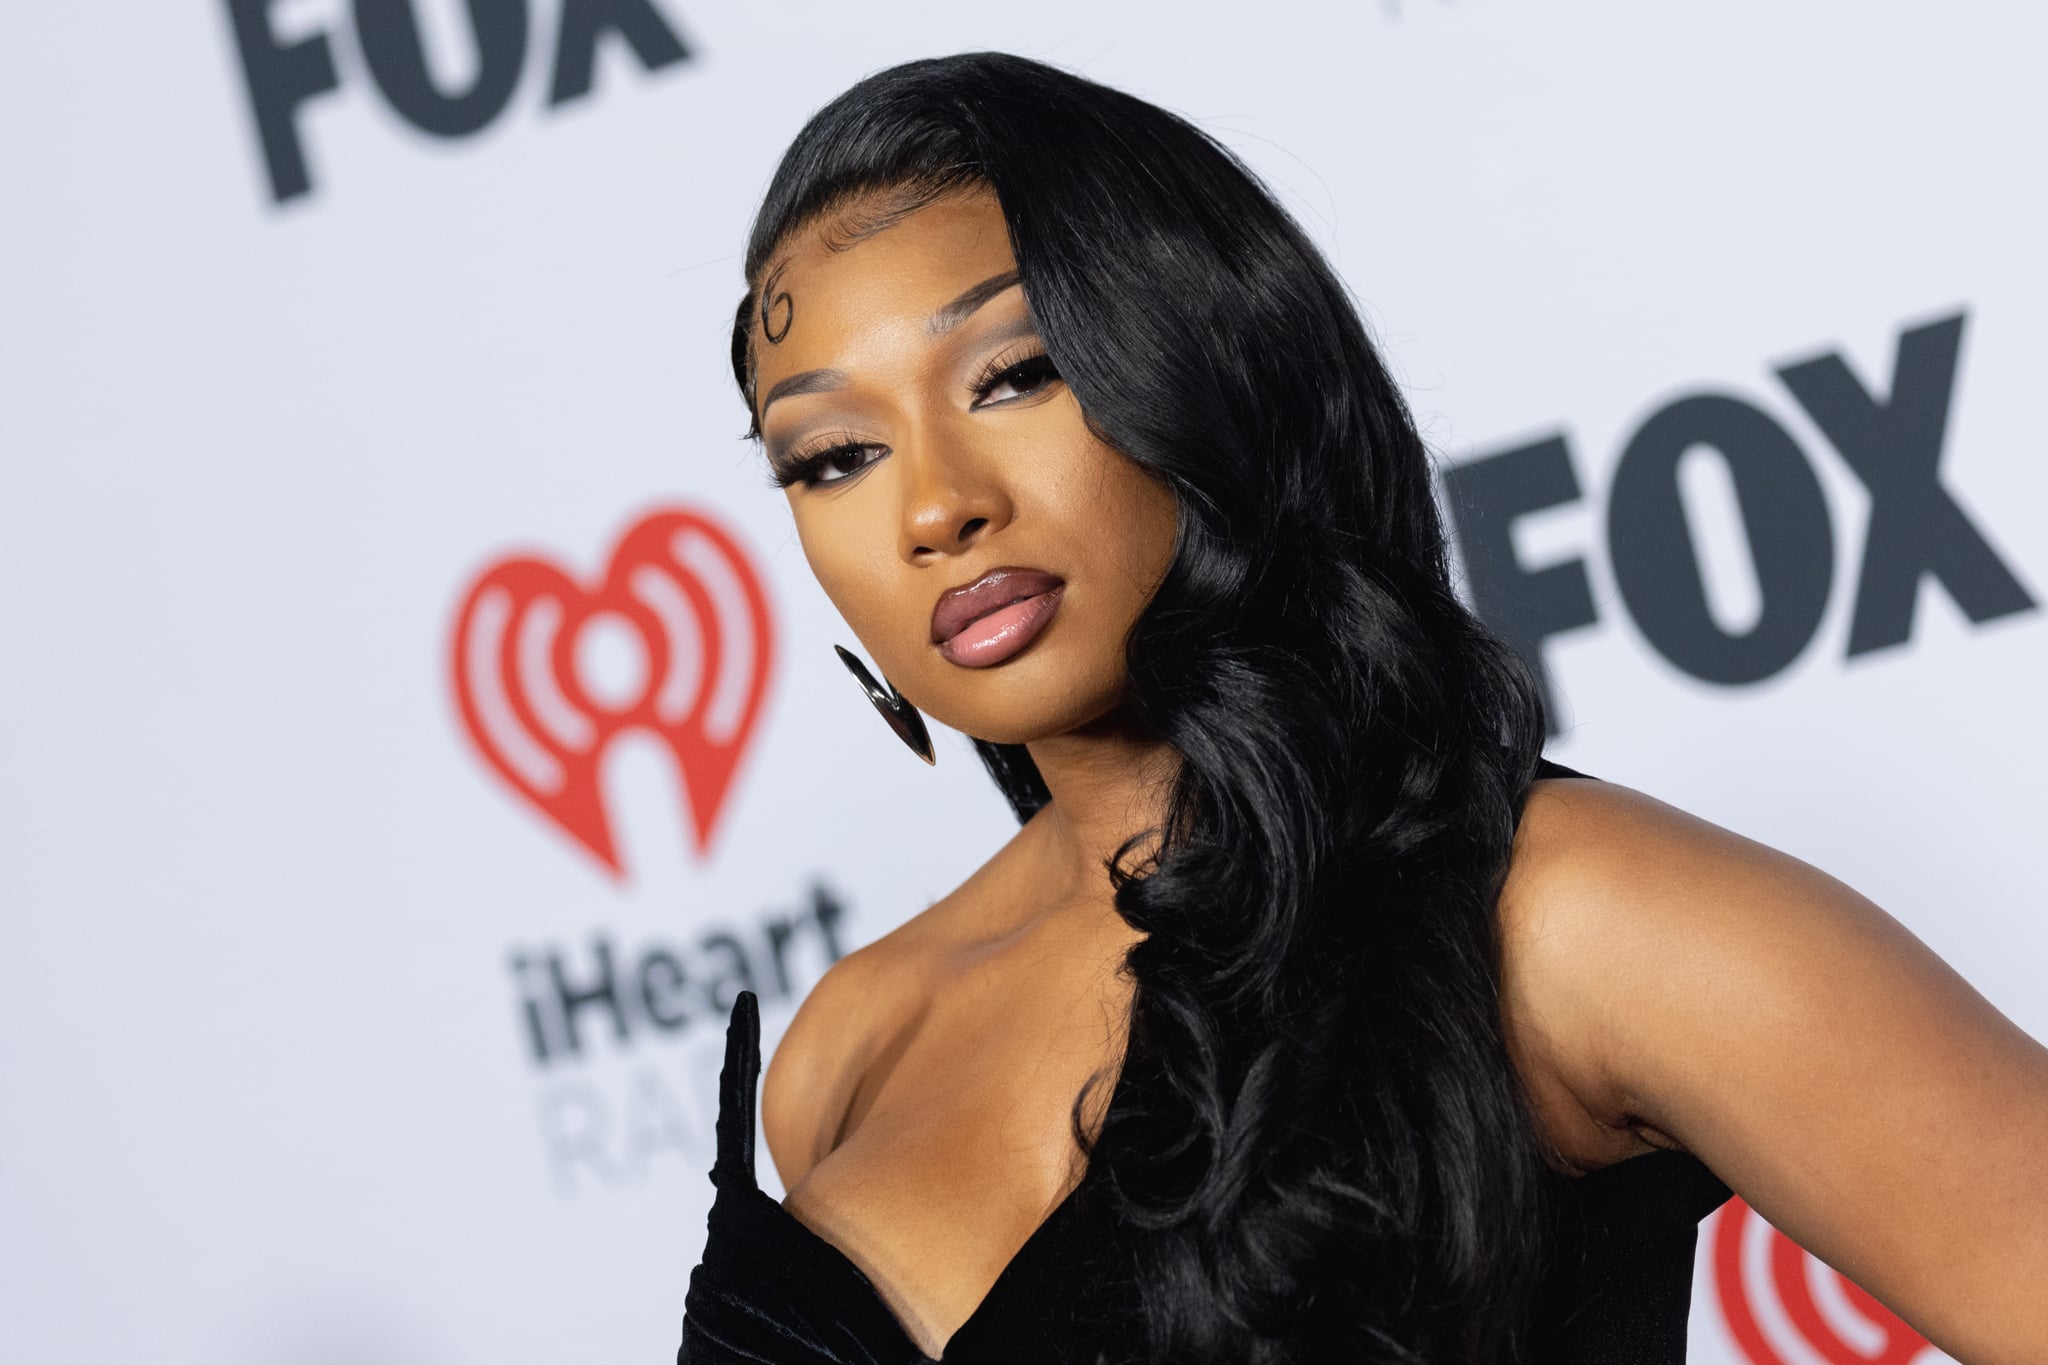 LOS ANGELES, CALIFORNIA - MARCH 22: Megan Thee Stallion arrives at the 2022 iHeartRadio music awards at Shrine Auditorium and Expo Hall on March 22, 2022 in Los Angeles, California. (Photo by Emma McIntyre/WireImage)